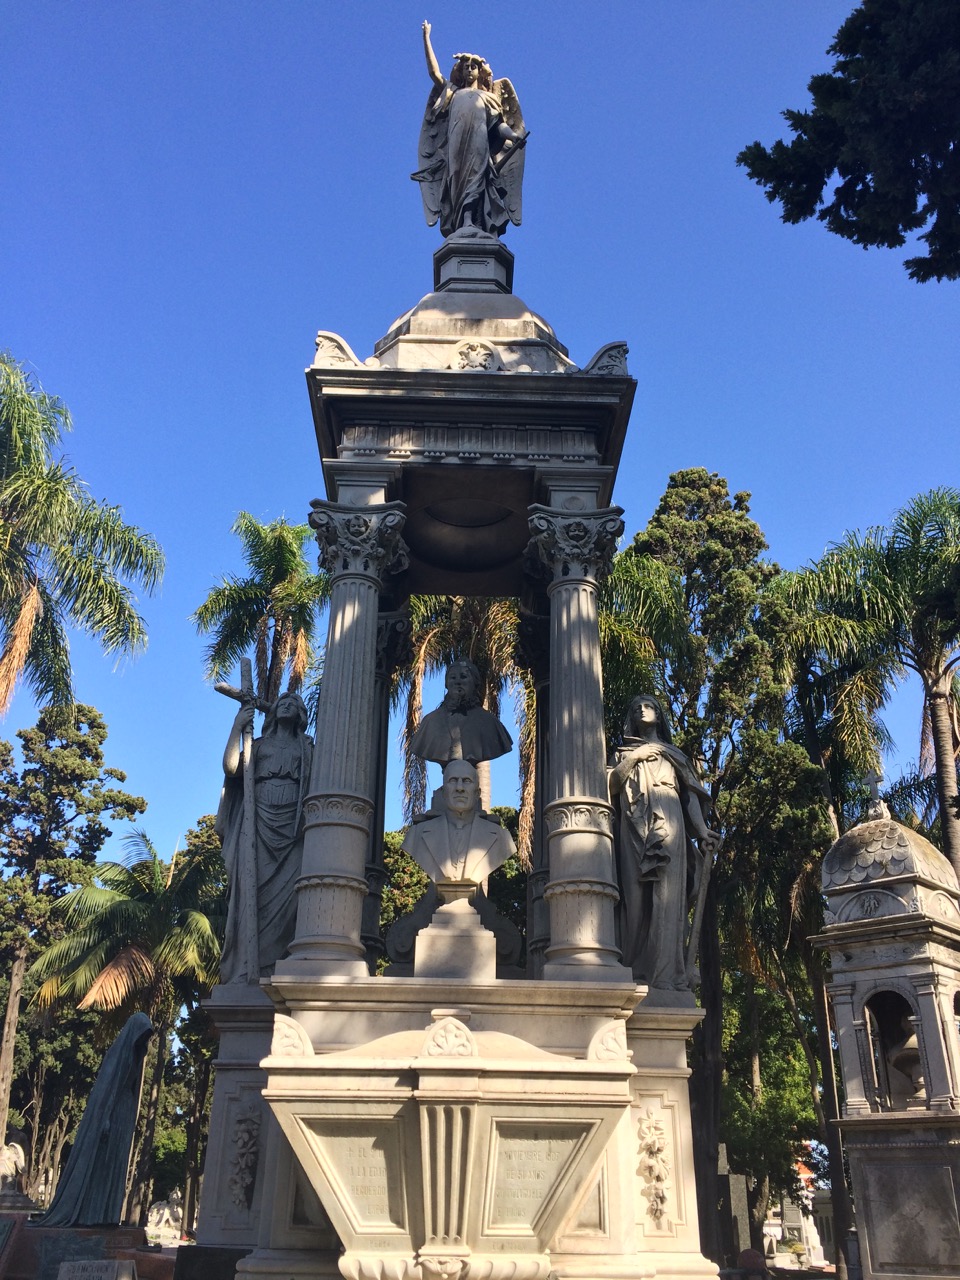 The Central Cemetery of Montevideo